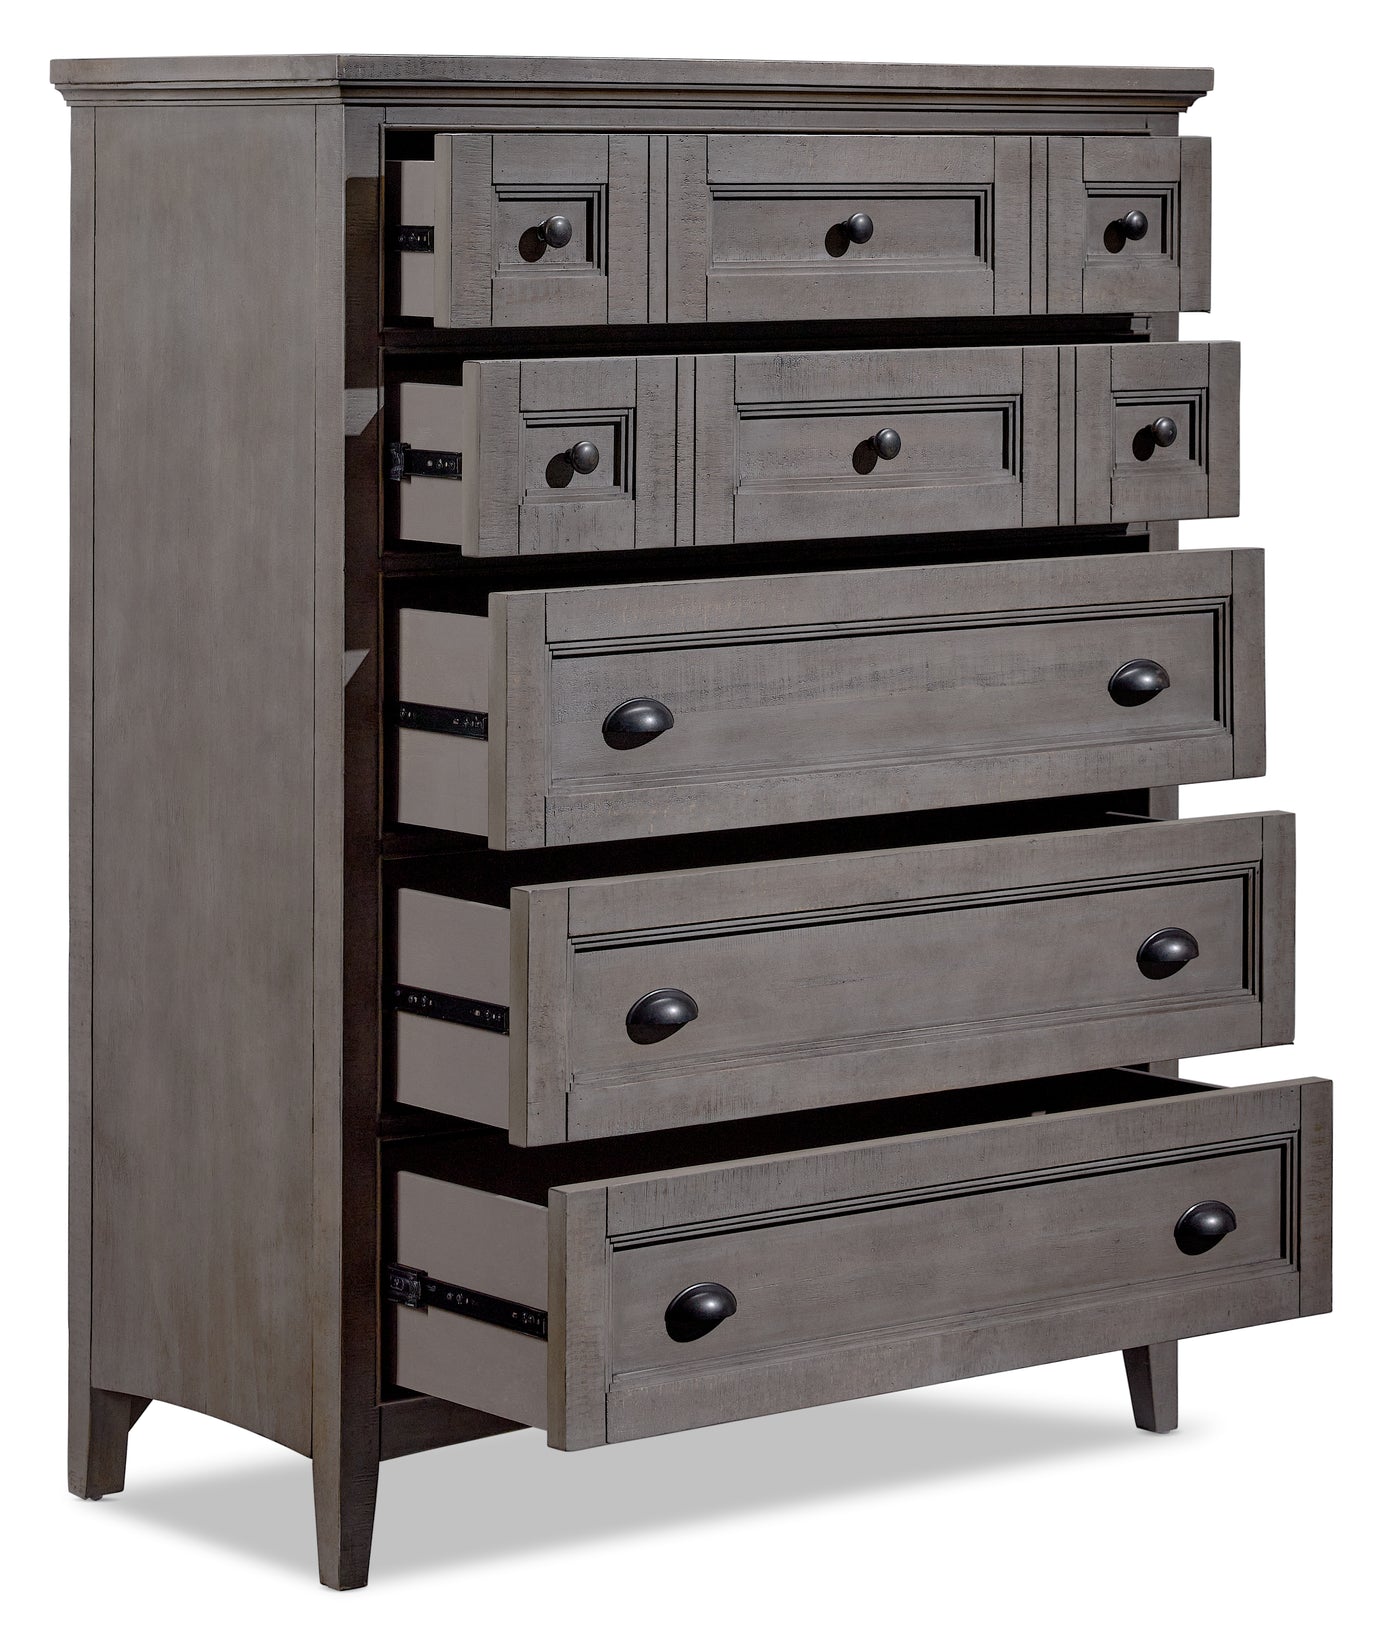 Paxton 5 Drawer Chest - Dovetail Grey